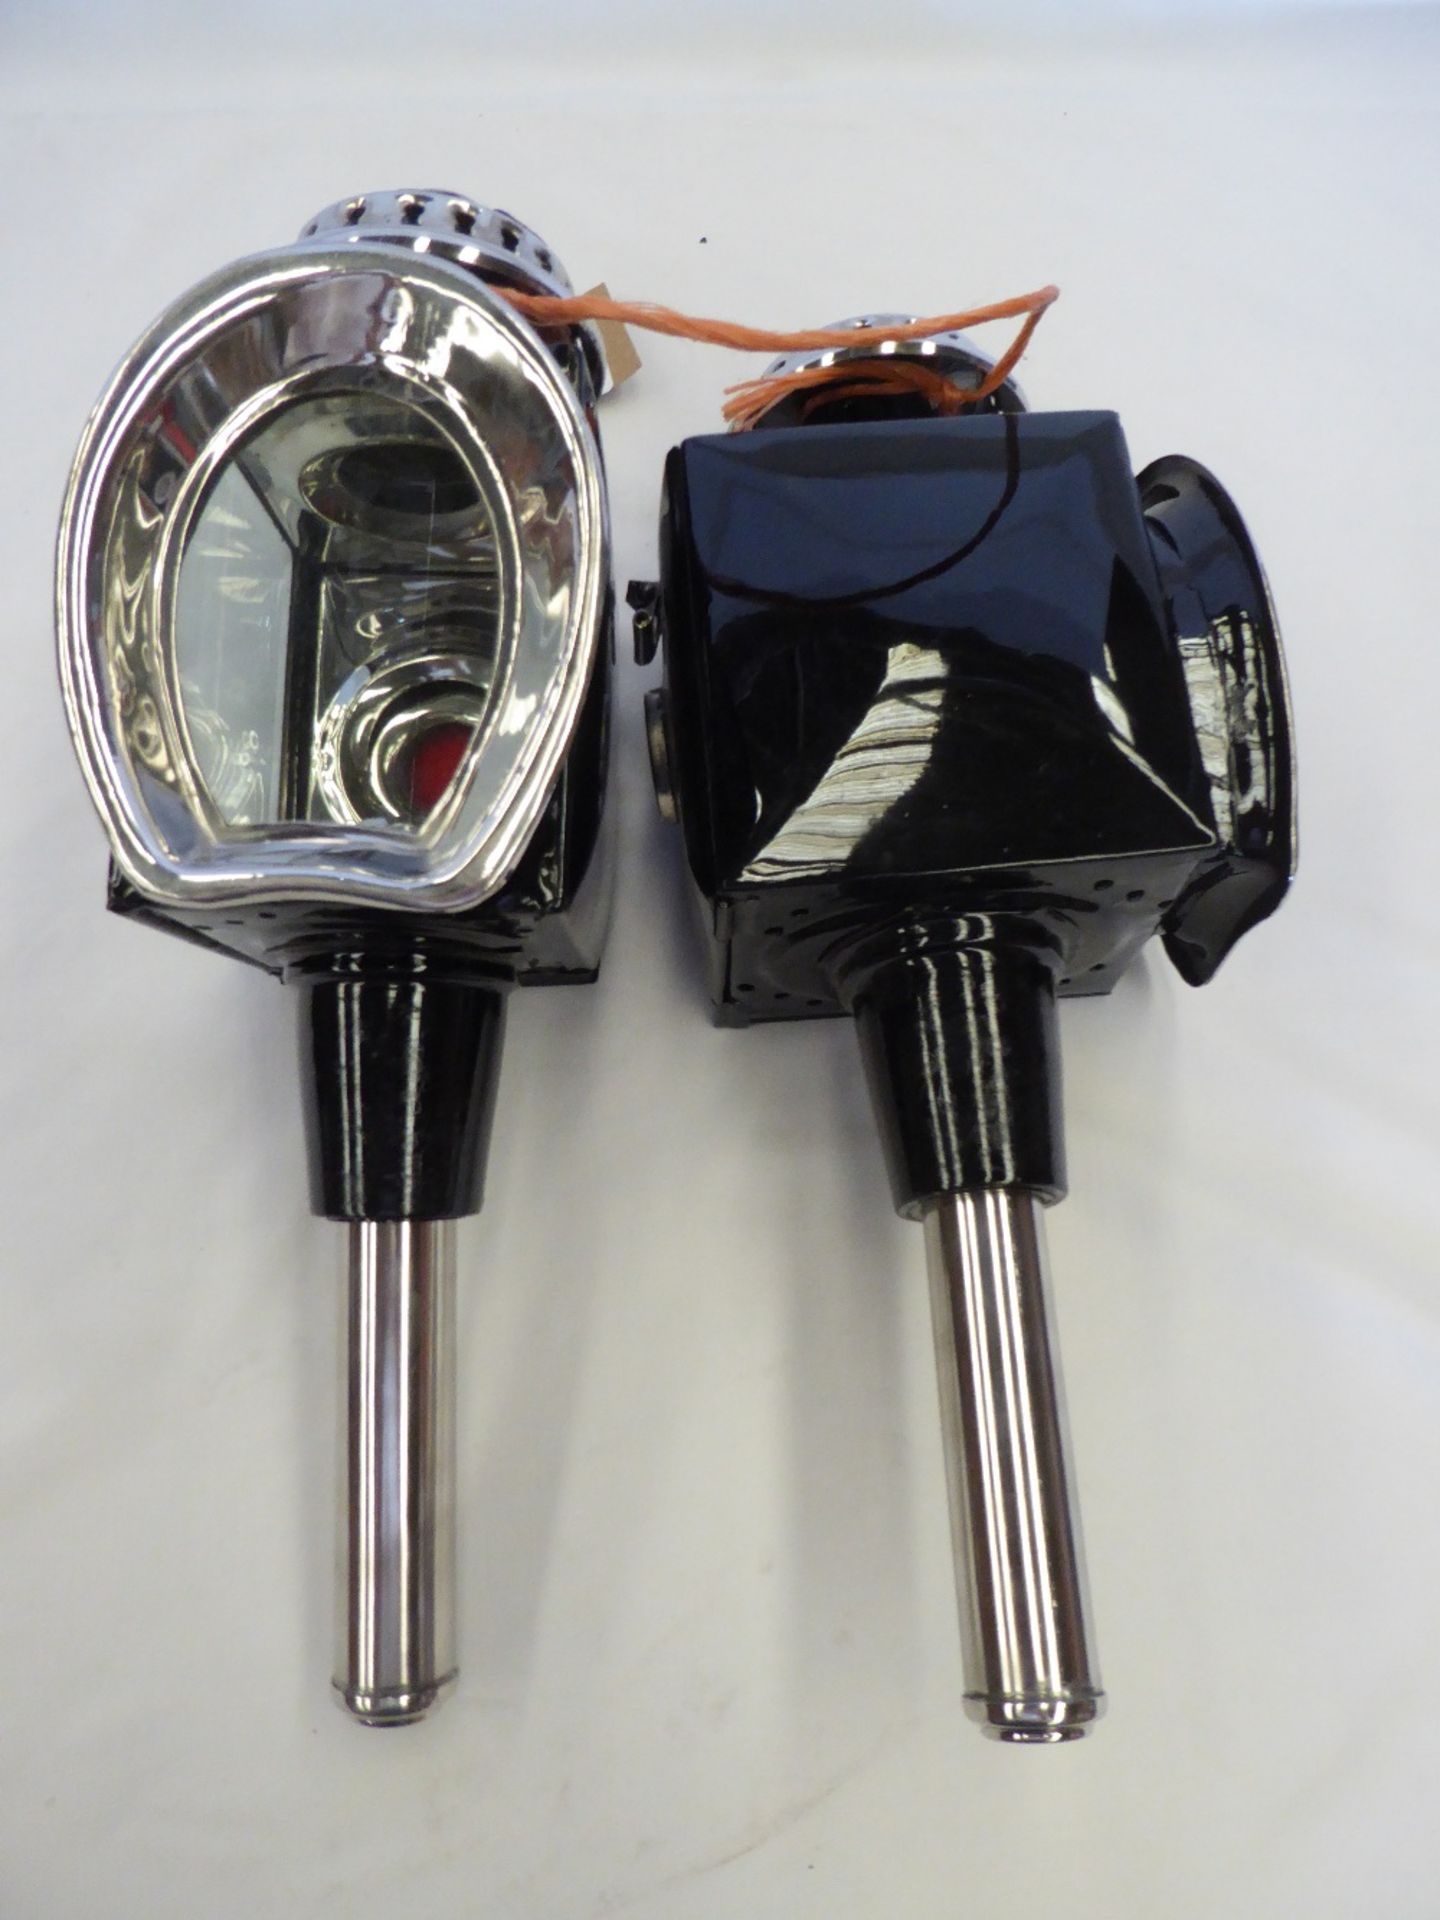 Pair of carriage lamps with horseshoe fronts and whitemetal trim - carries VAT